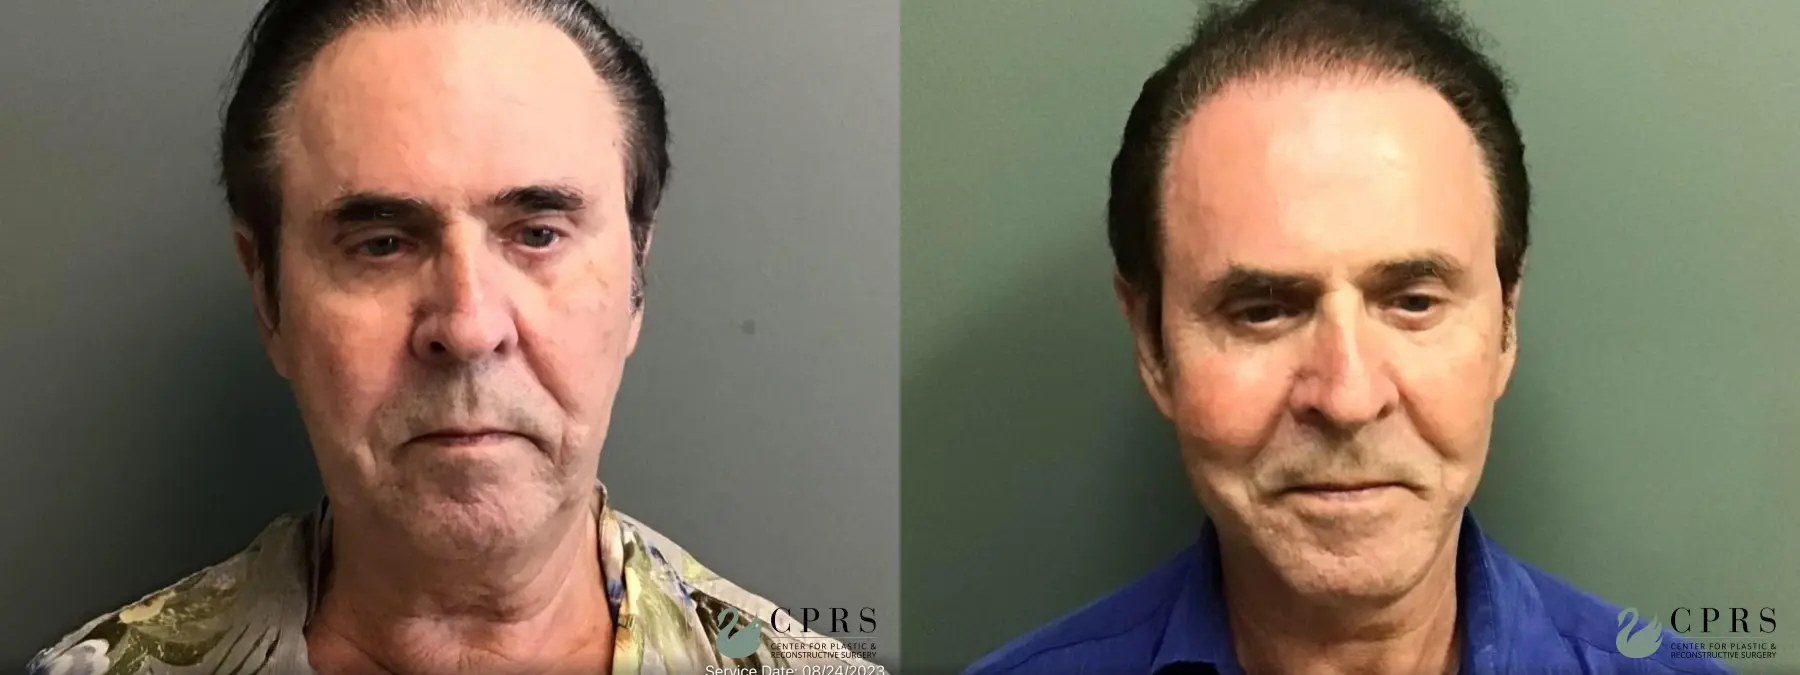 Facelift & Neck Lift: Patient 8 - Before and After  